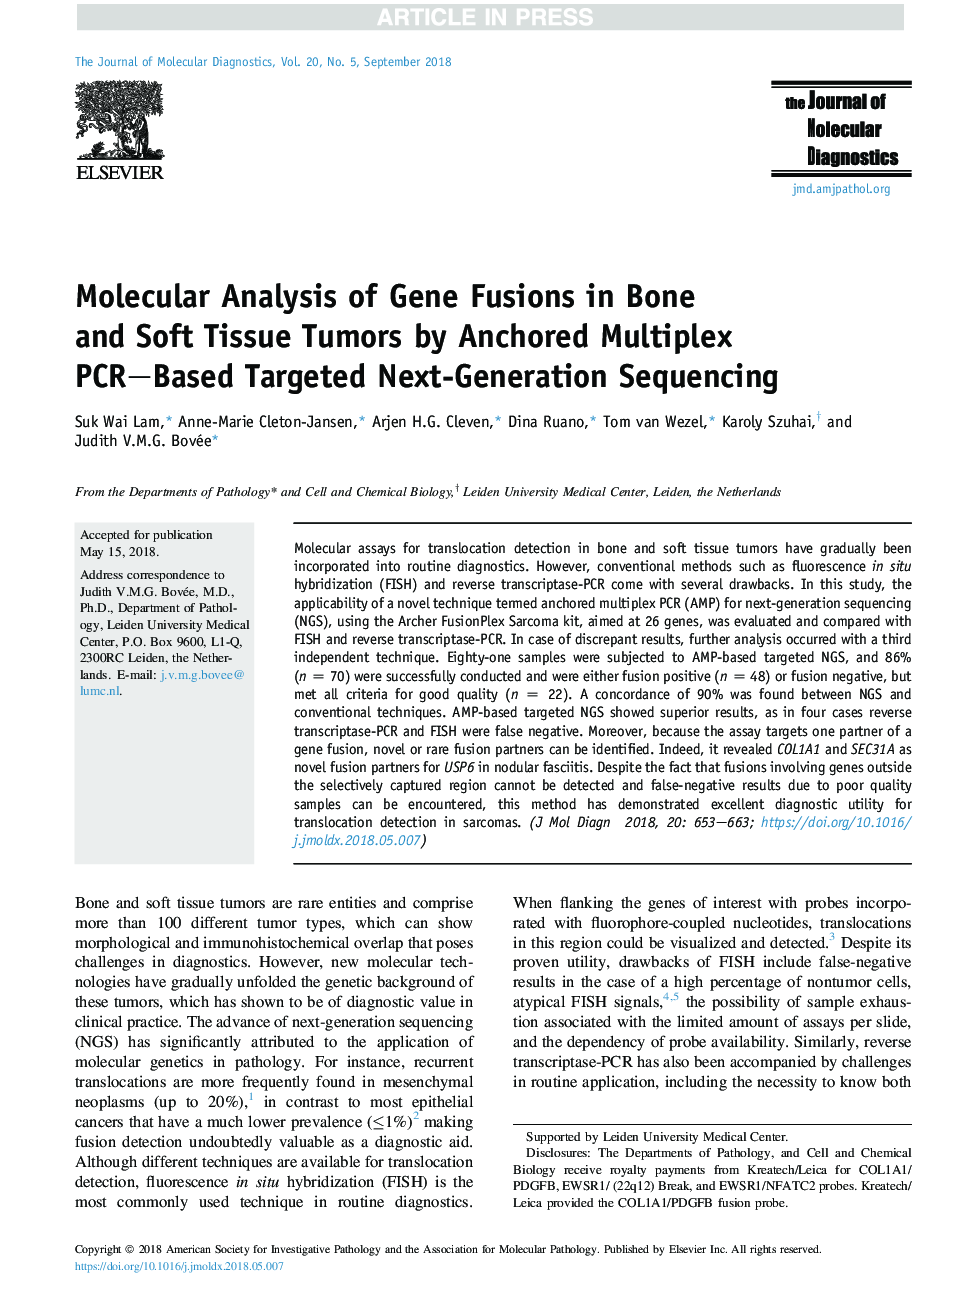 Molecular Analysis of Gene Fusions in Bone and Soft Tissue Tumors by Anchored Multiplex PCR-Based Targeted Next-Generation Sequencing